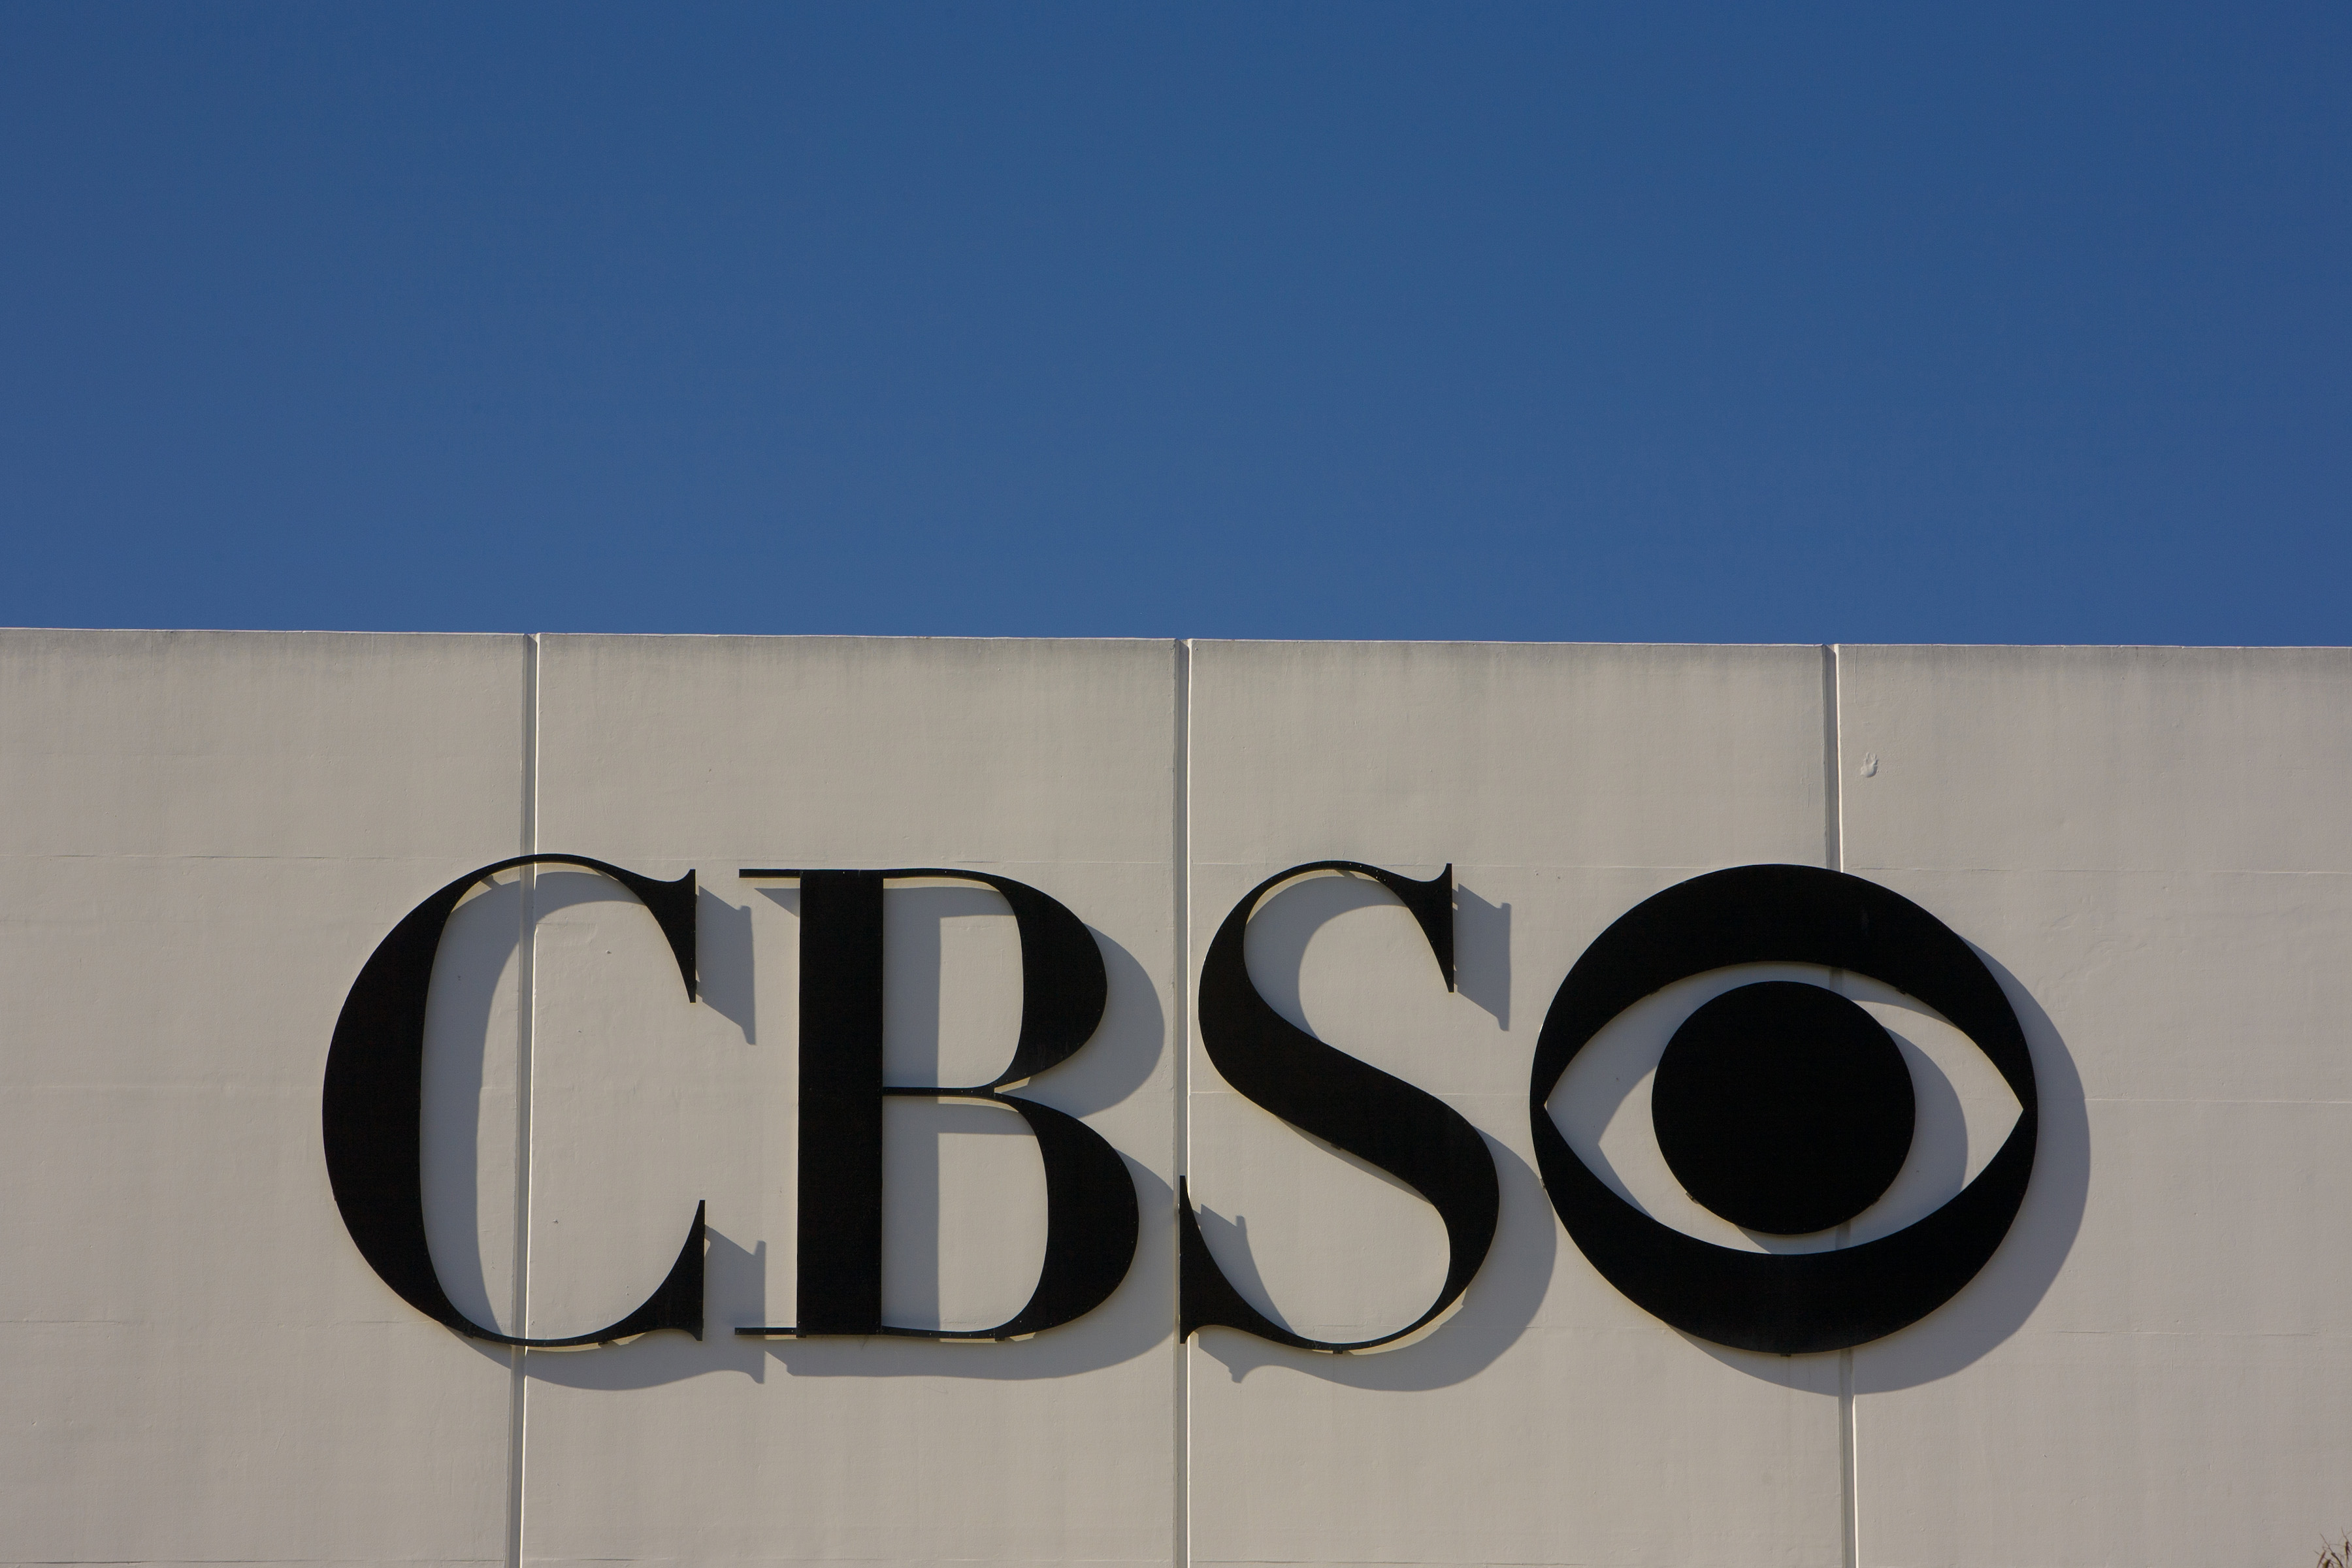 In partnership with NAACP, CBS orders daytime soap opera about wealthy Black family